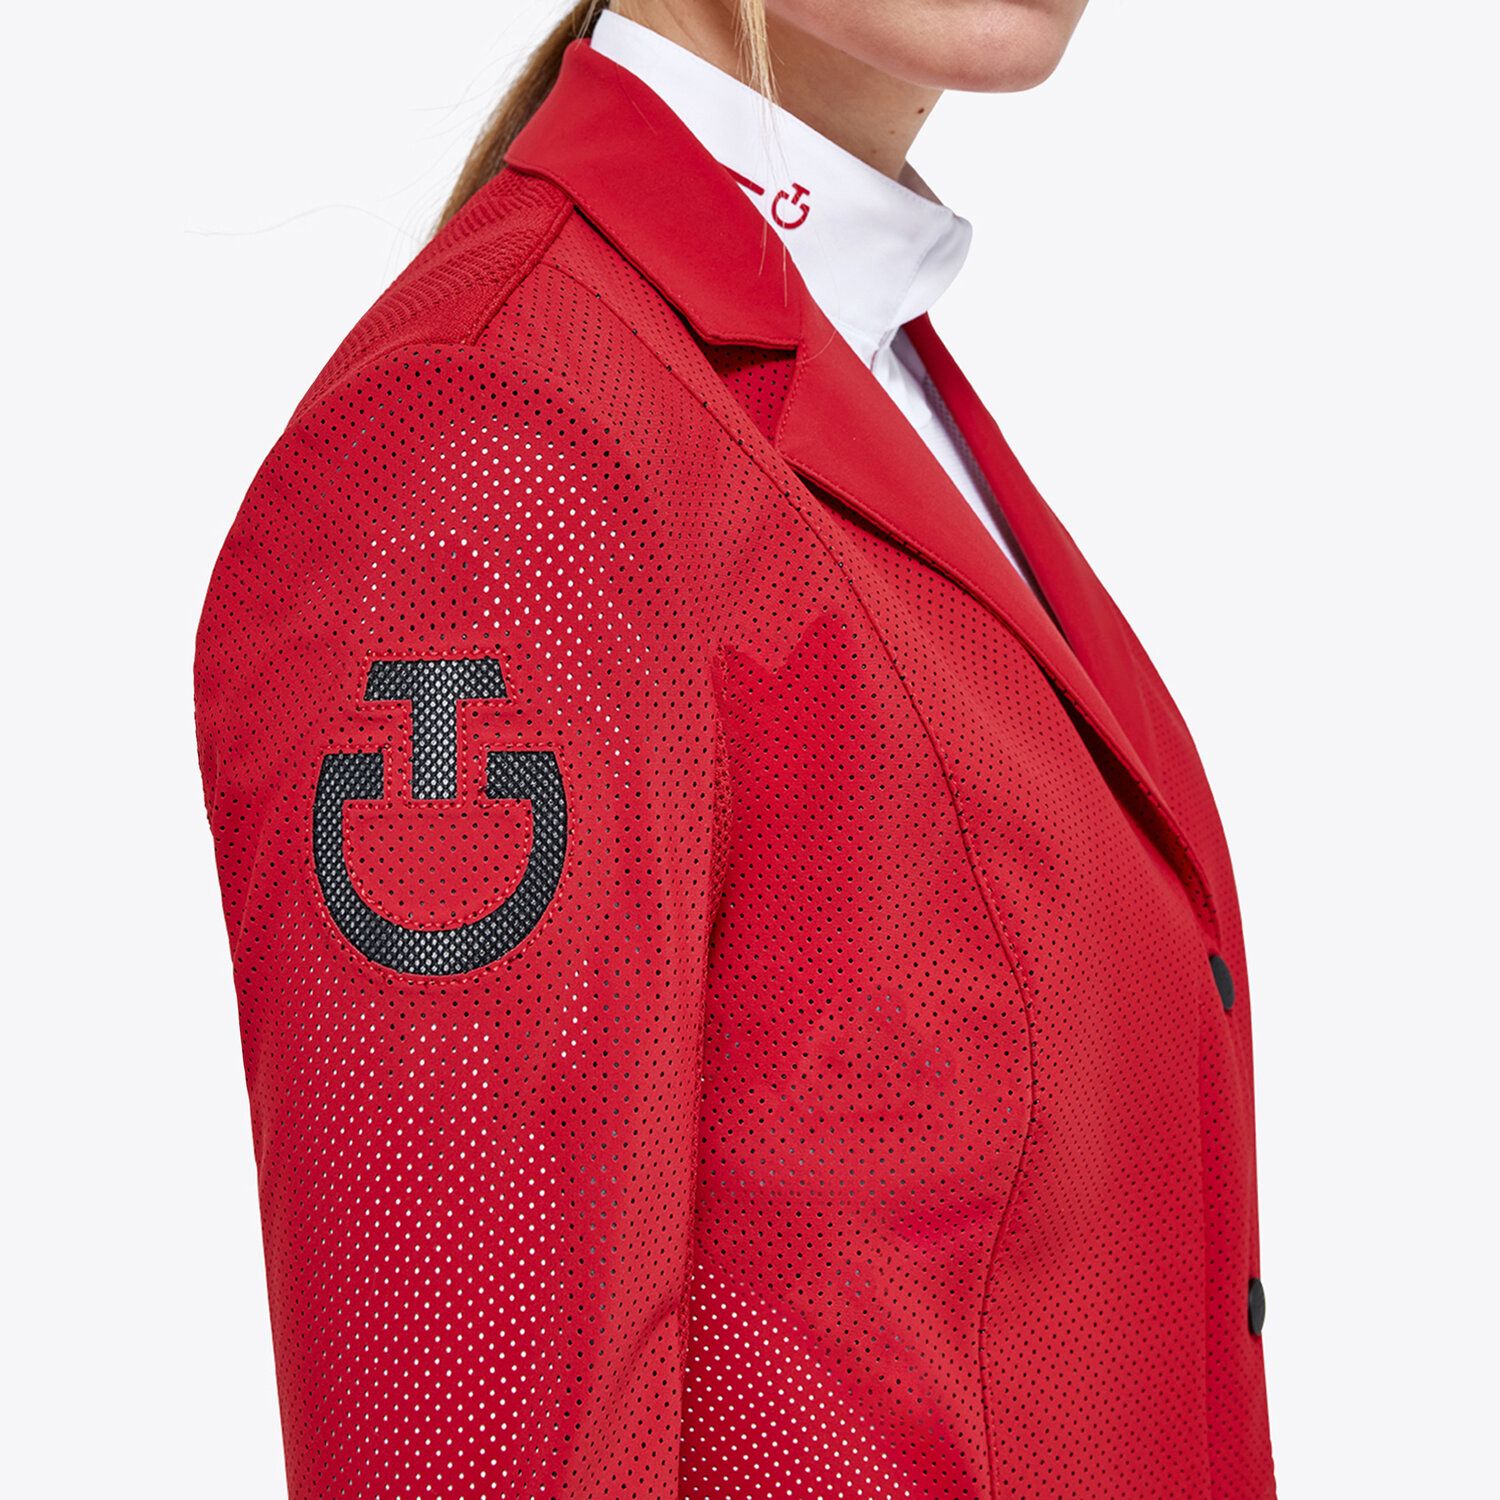 Cavalleria Toscana Women's competition riding jacket embroidery RED-5